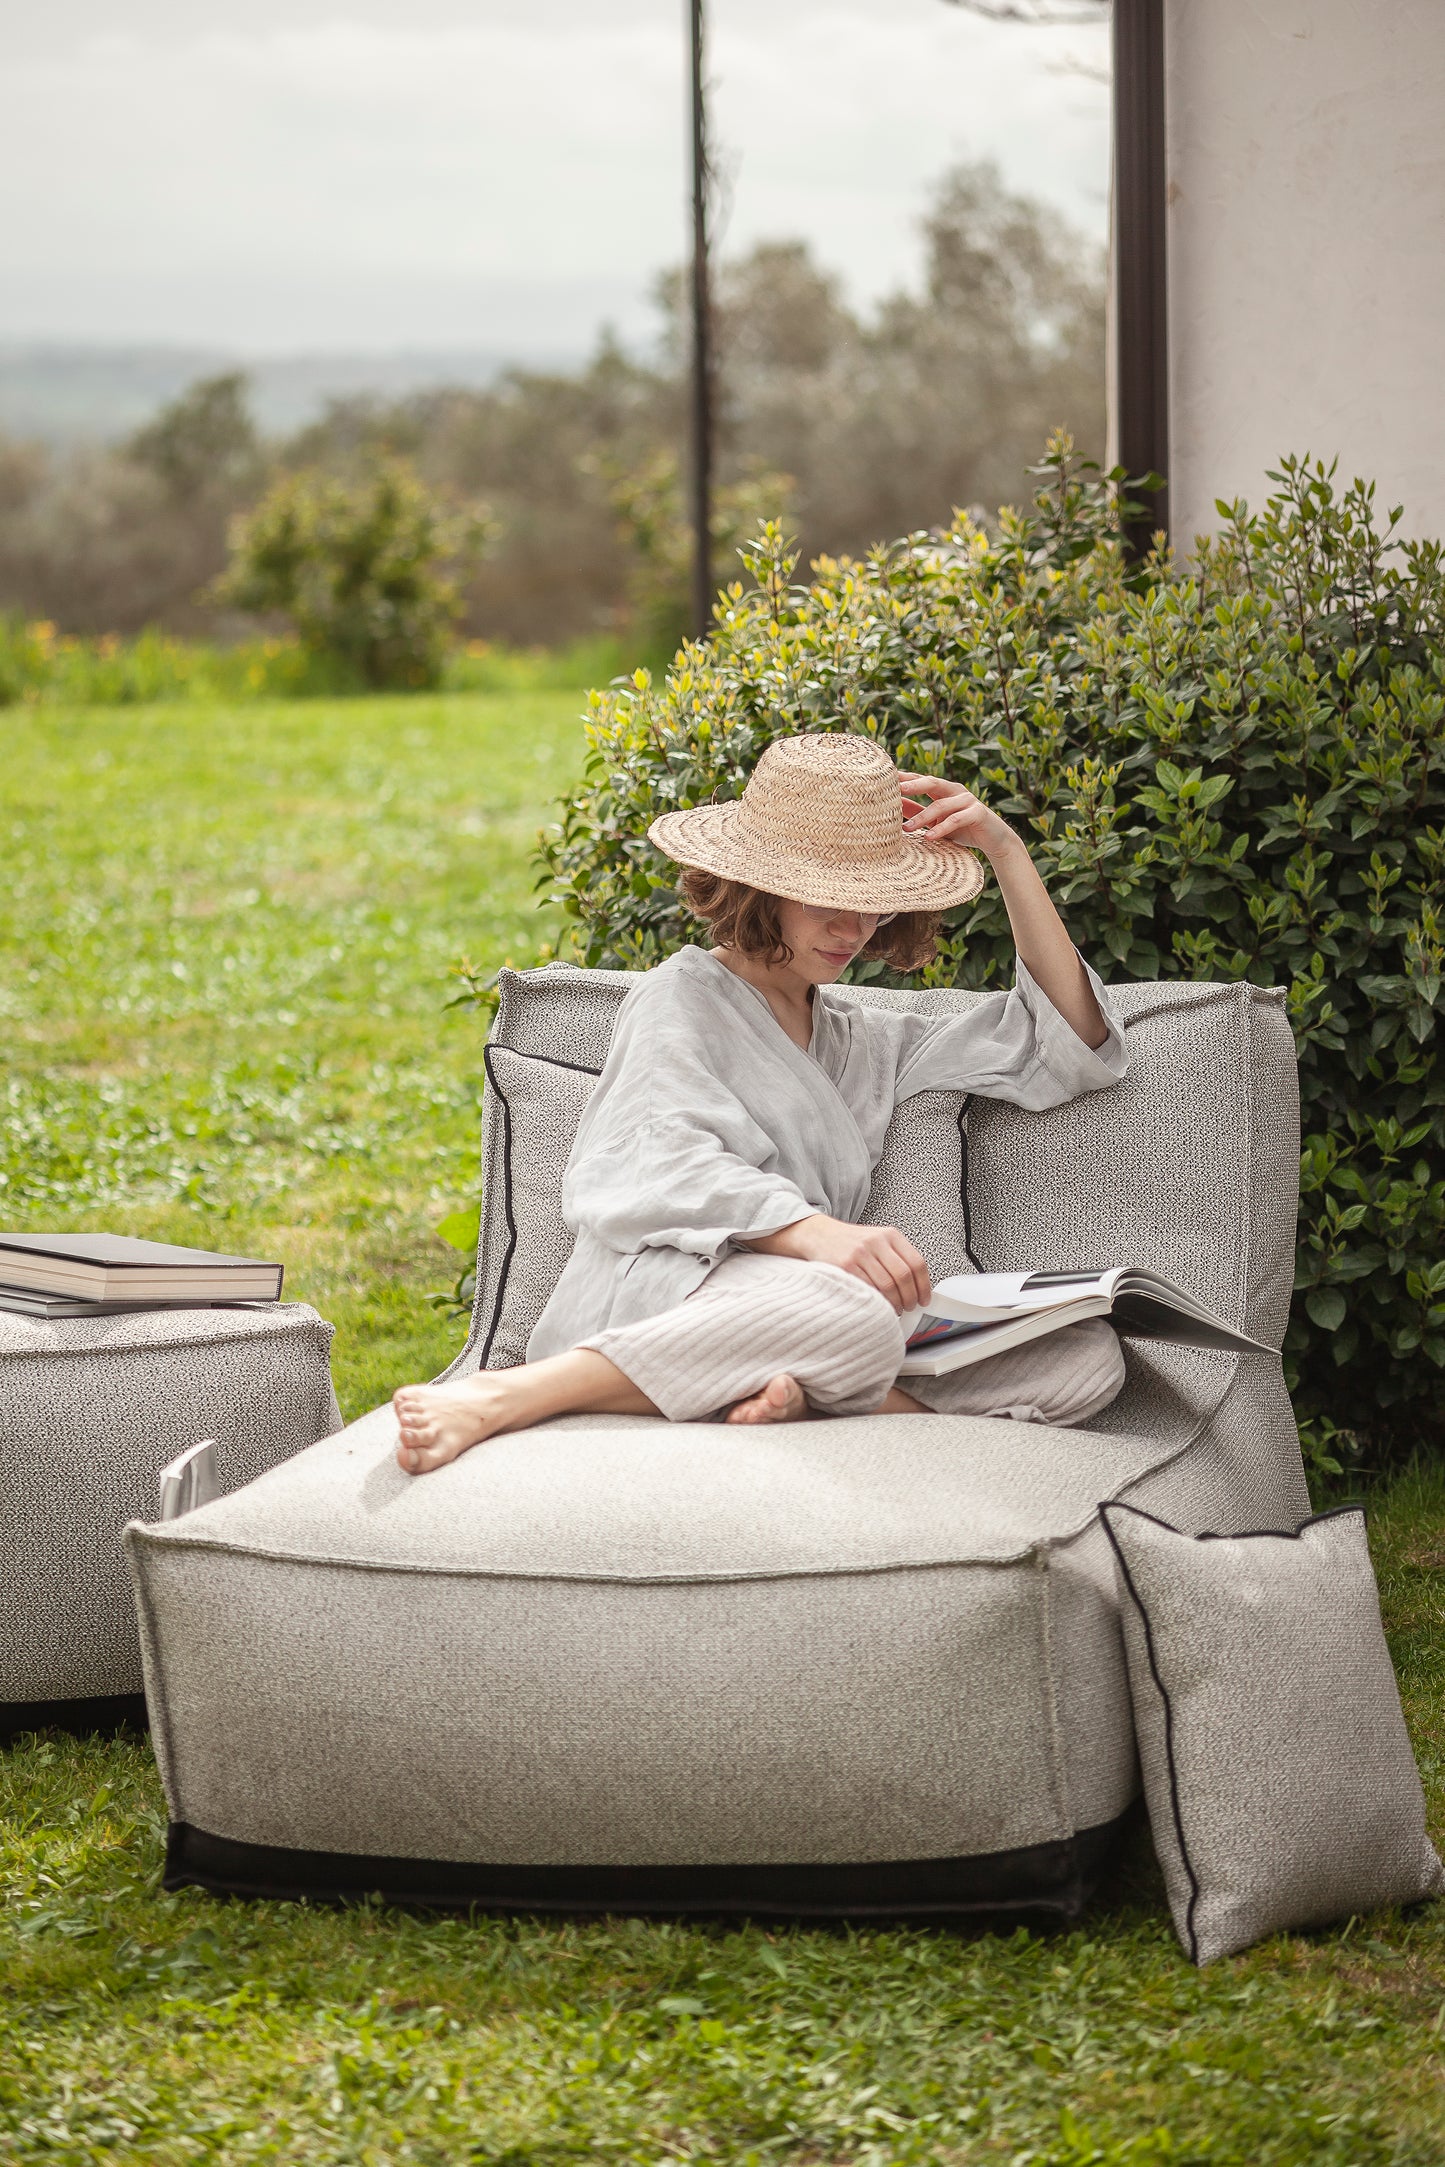 Caccini outdoor poufs